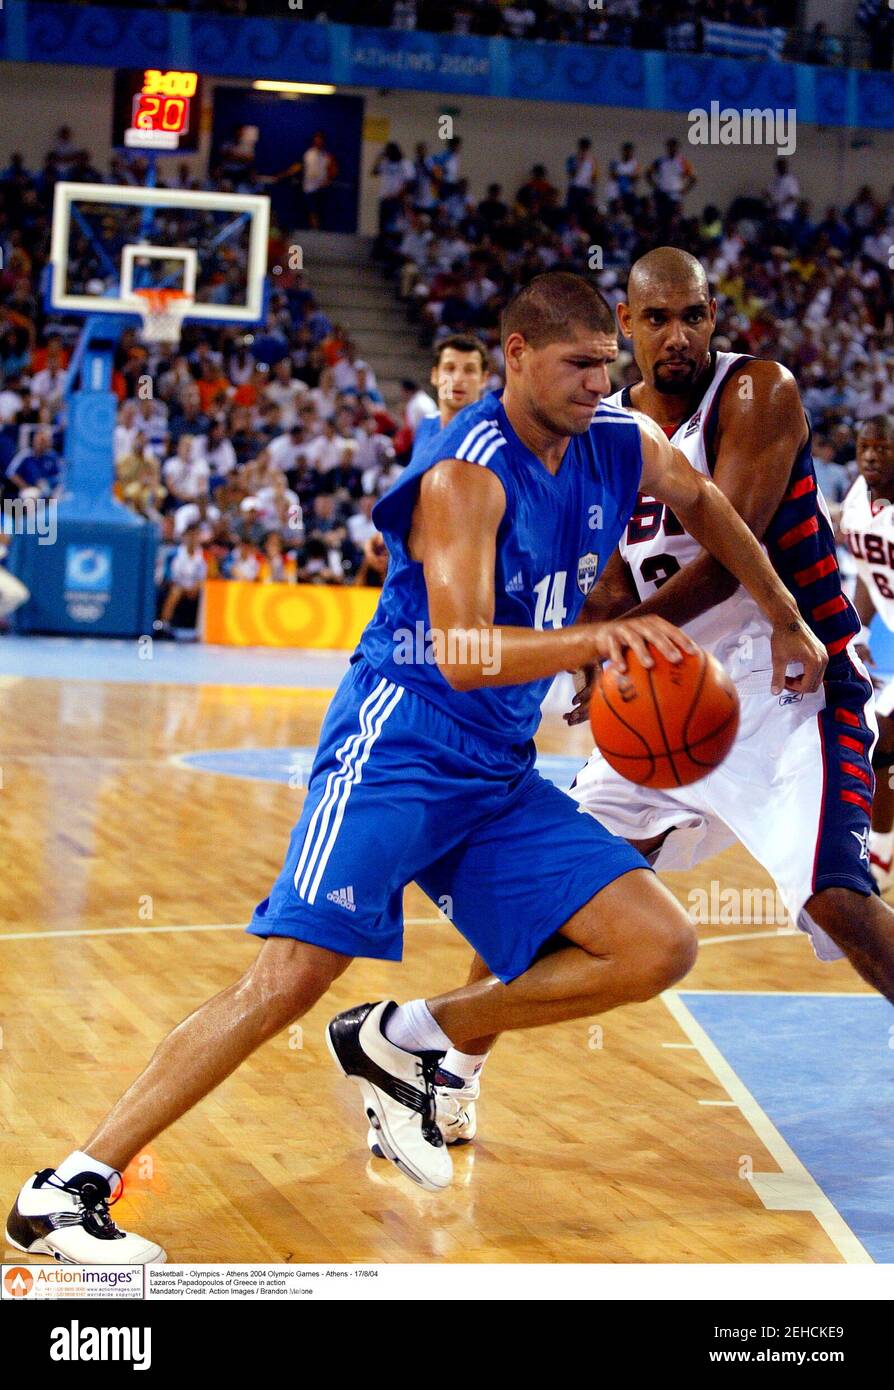 Basketball - Olympics - Athens 2004 Olympic Games - Athens - 17/8/04  Lazaros Papadopoulos of Greece in action Mandatory Credit: Action Images /  Brandon Malone Stock Photo - Alamy